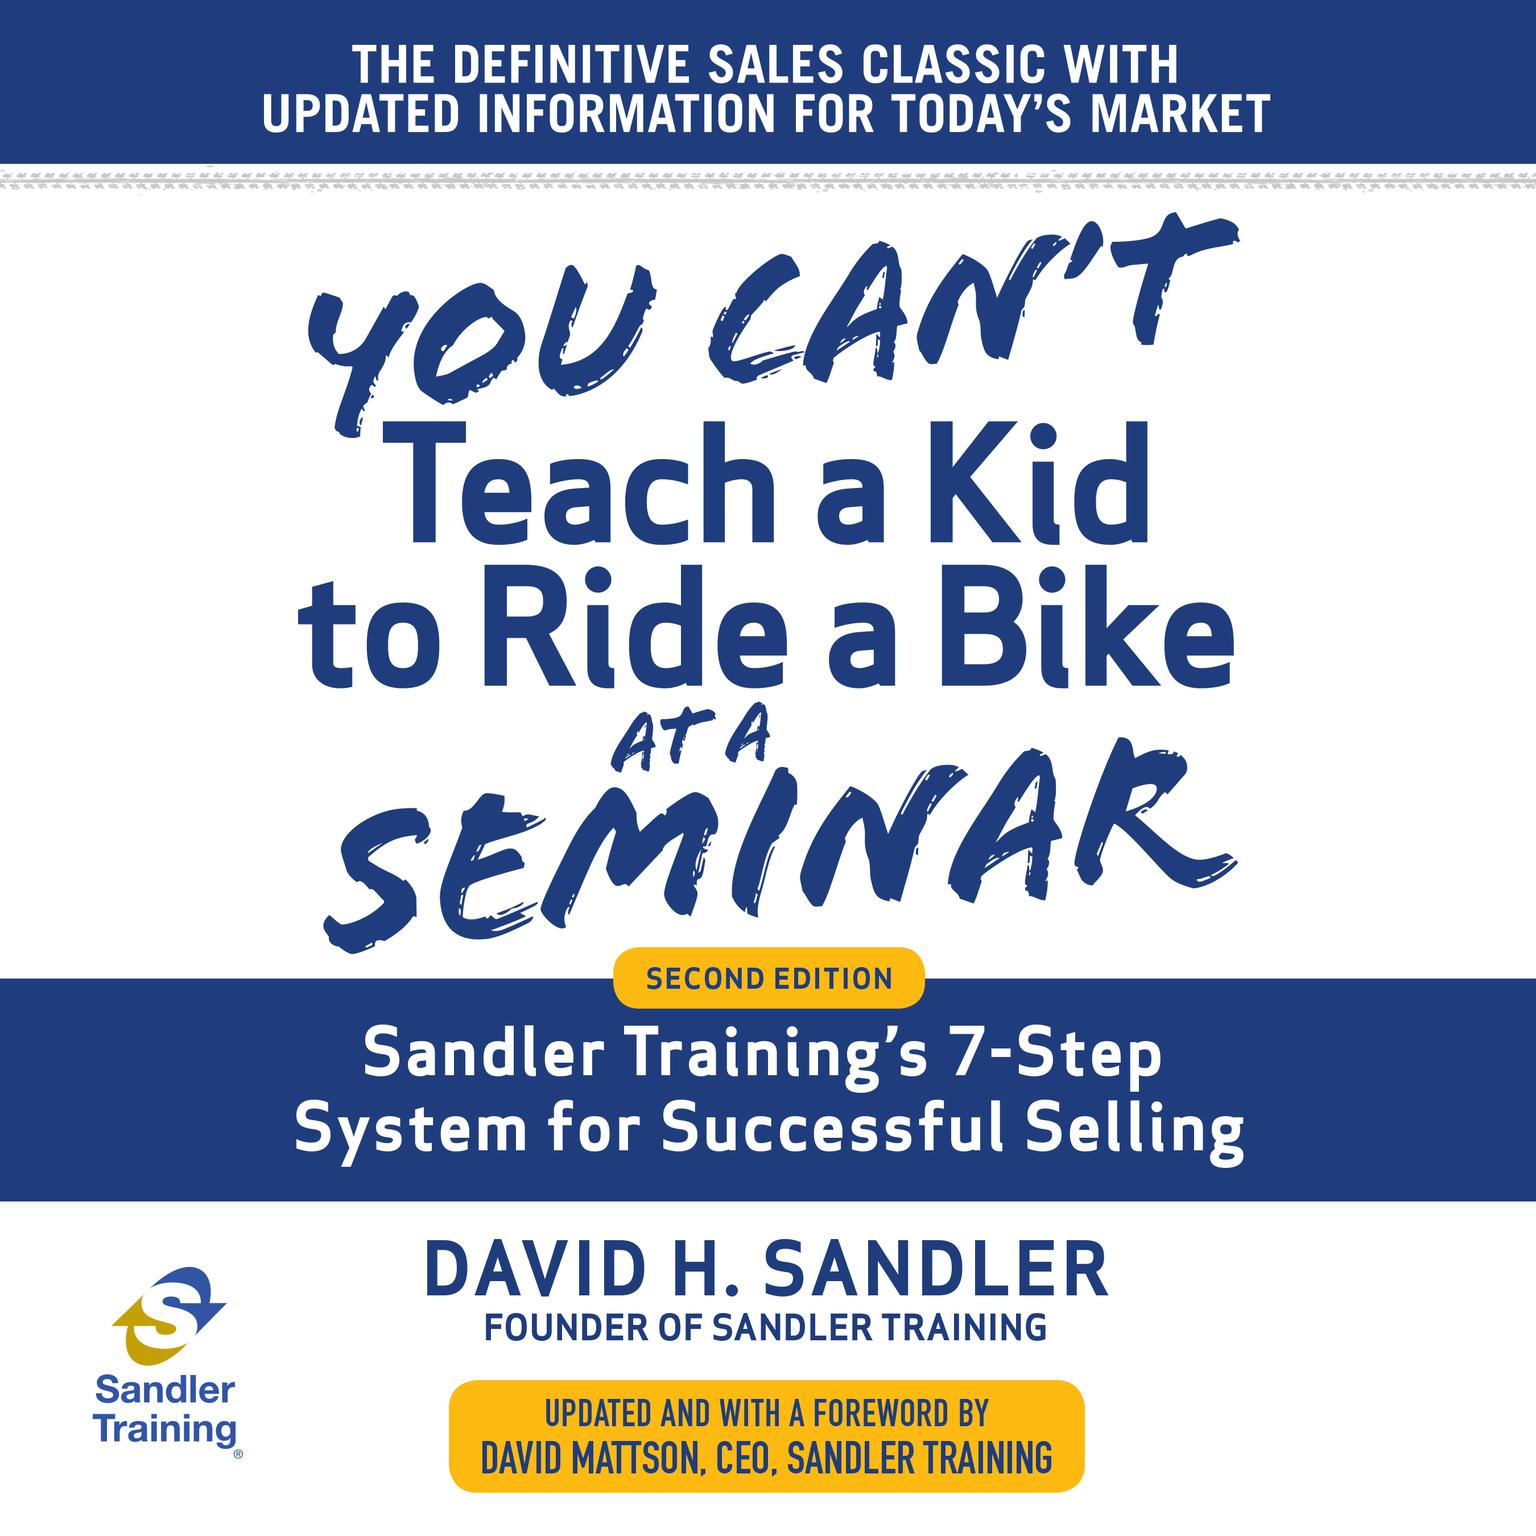 You Cant Teach a Kid to Ride a Bike at a Seminar: Sandler Trainings 7-Step System for Successful Selling 2nd Edition Audiobook, by David Mattson